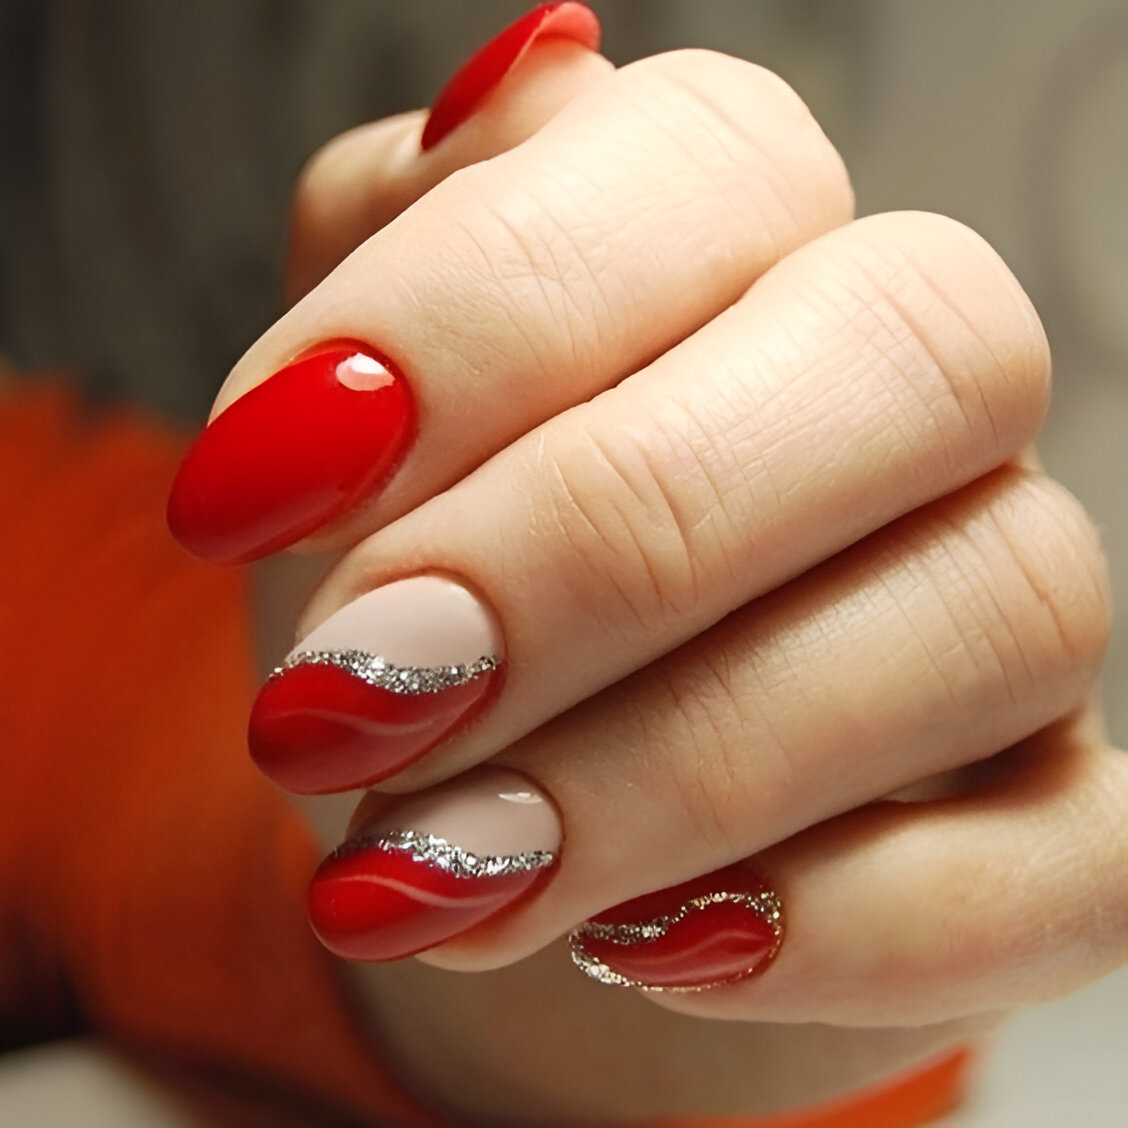 Classy Red French Manicure With Gold Glitter Lines